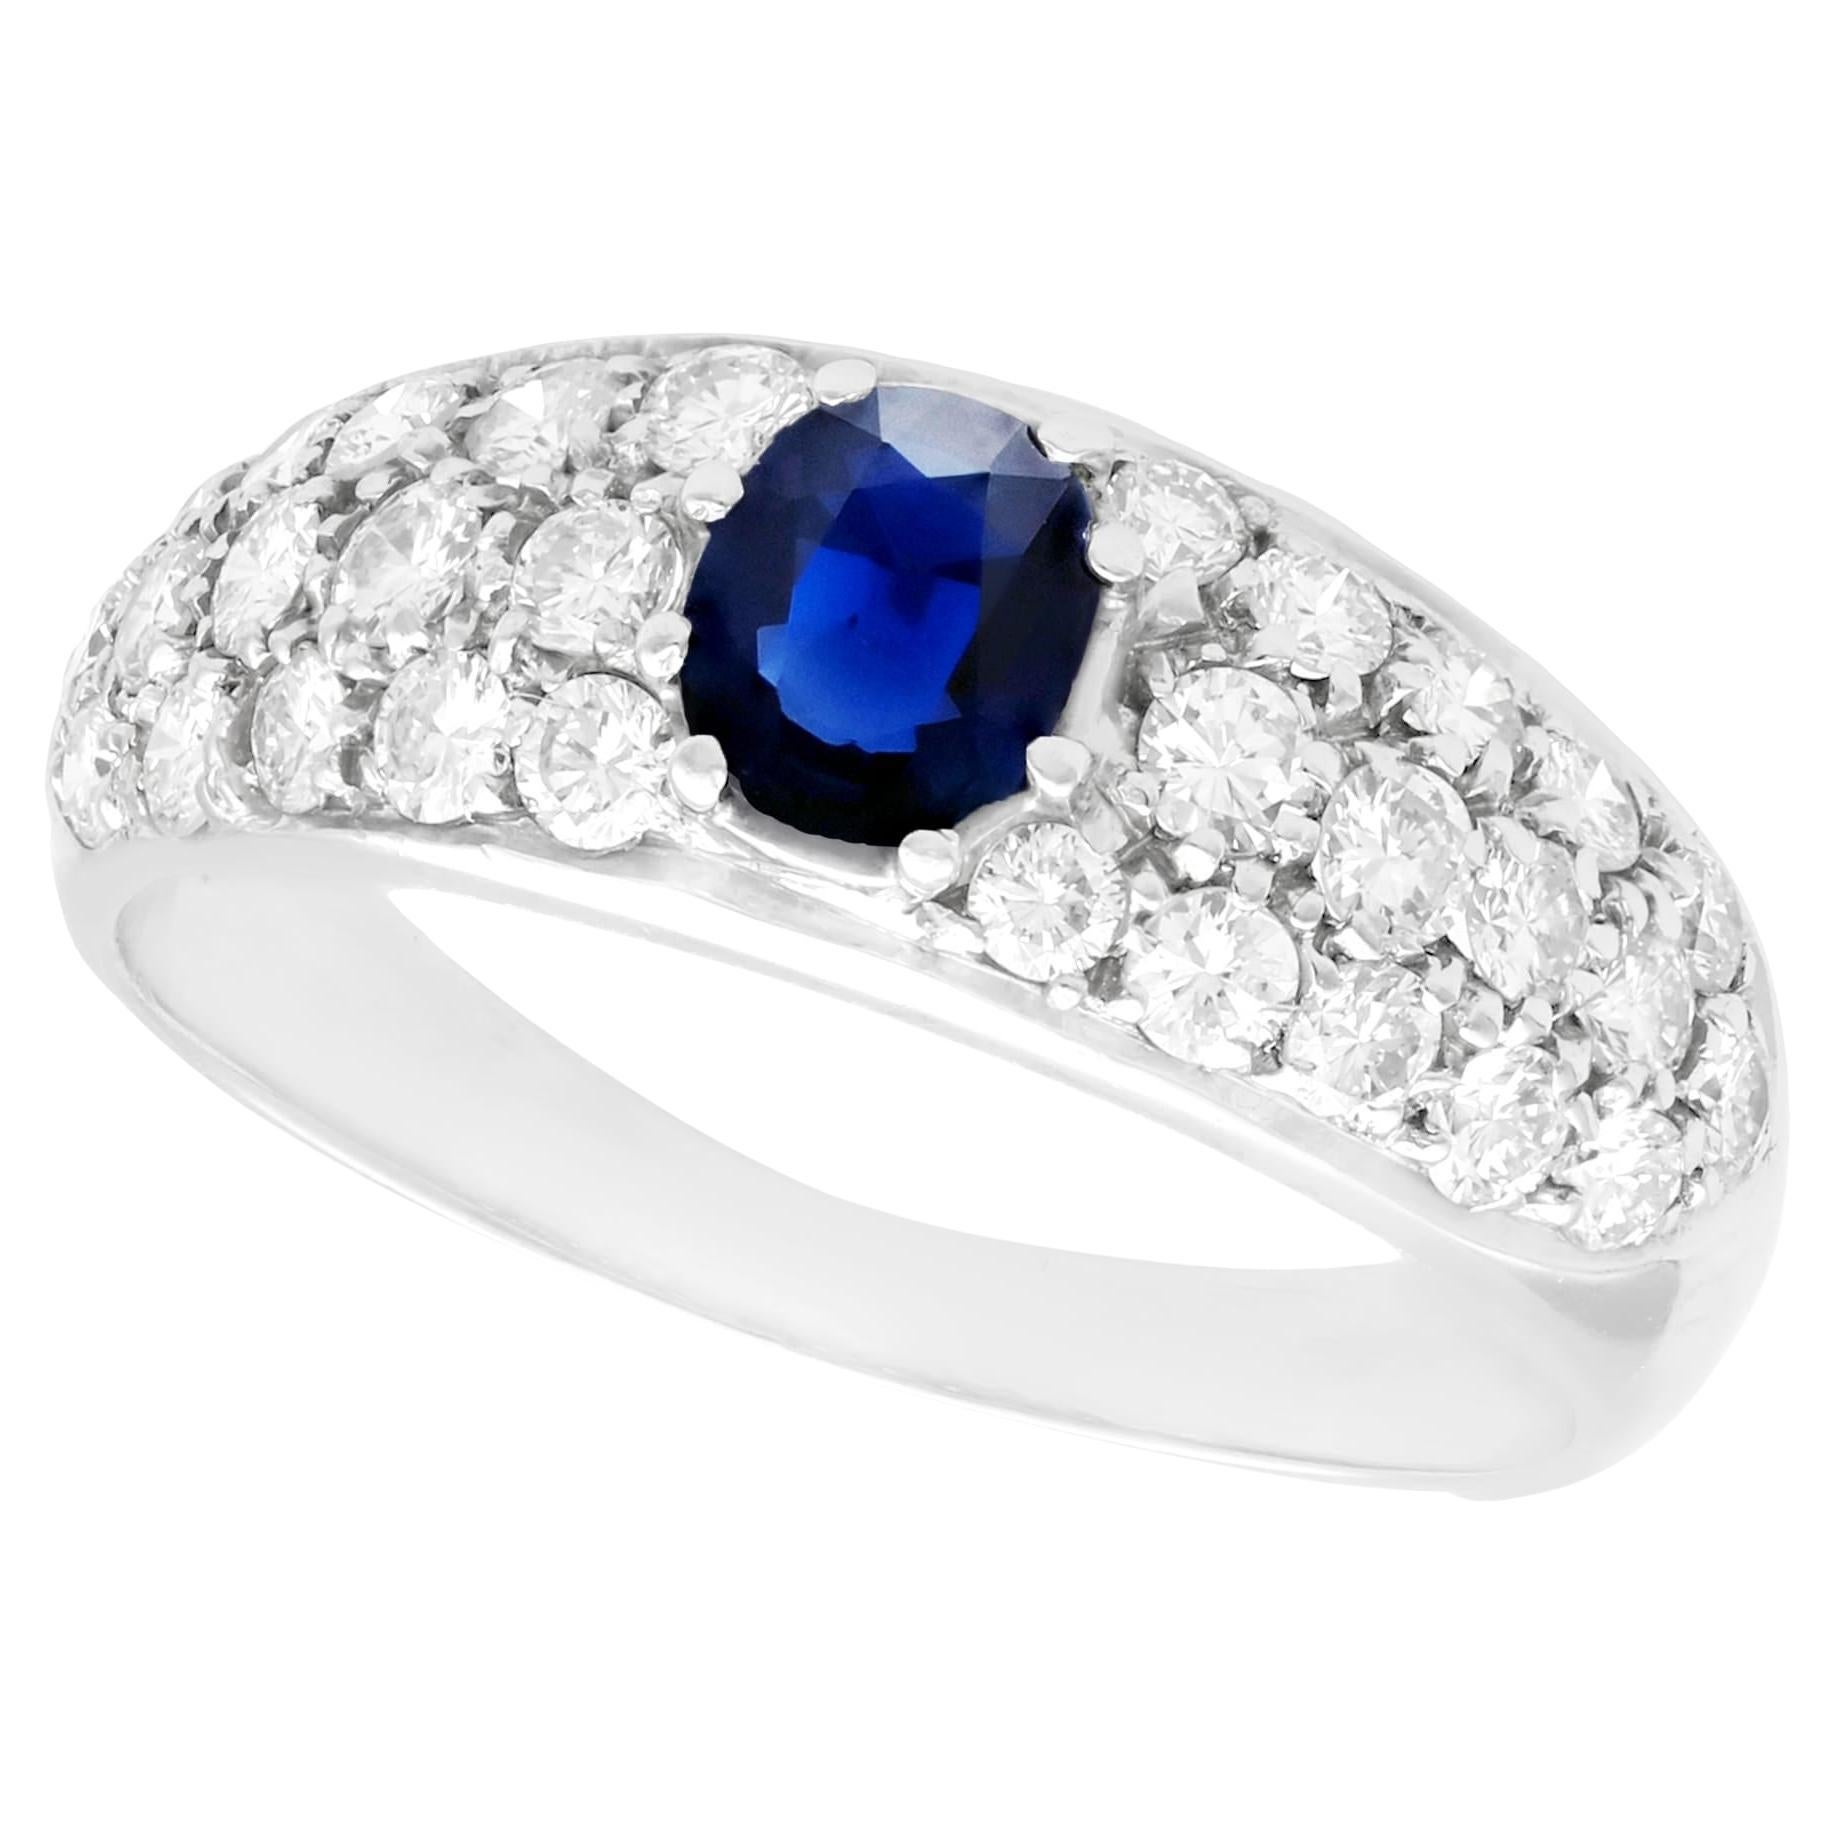 1970s Sapphire 1.95 Carat Diamond and White Gold Engagement Ring